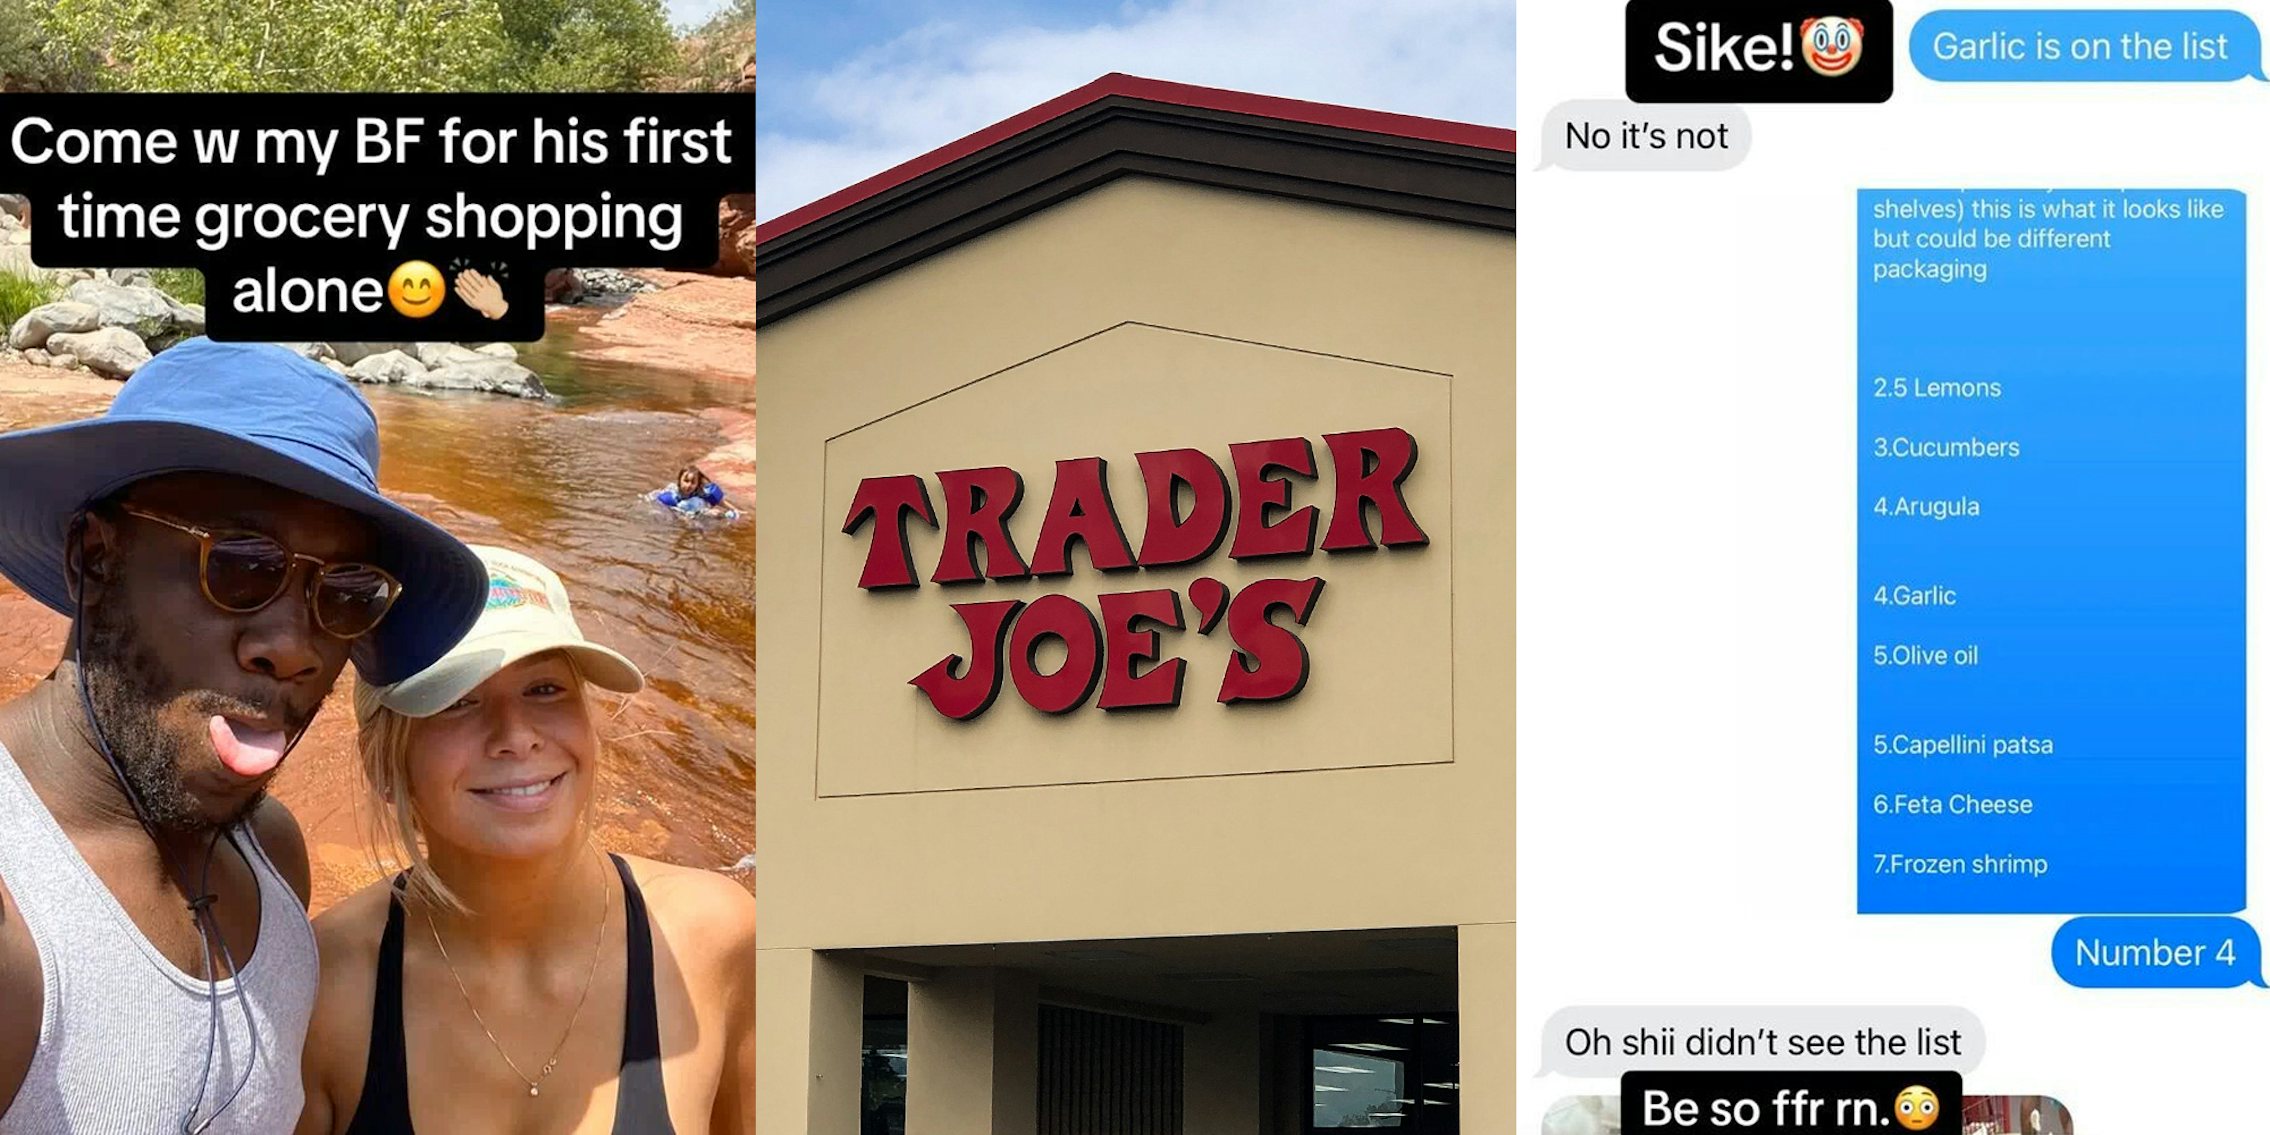 couple outside with caption 'Come w my BF for his first time grocery shopping alone' (l) Trader Joe's building with sign (c) shopping list in text message with captions 'Sike! Be so ffr rn.' (r)